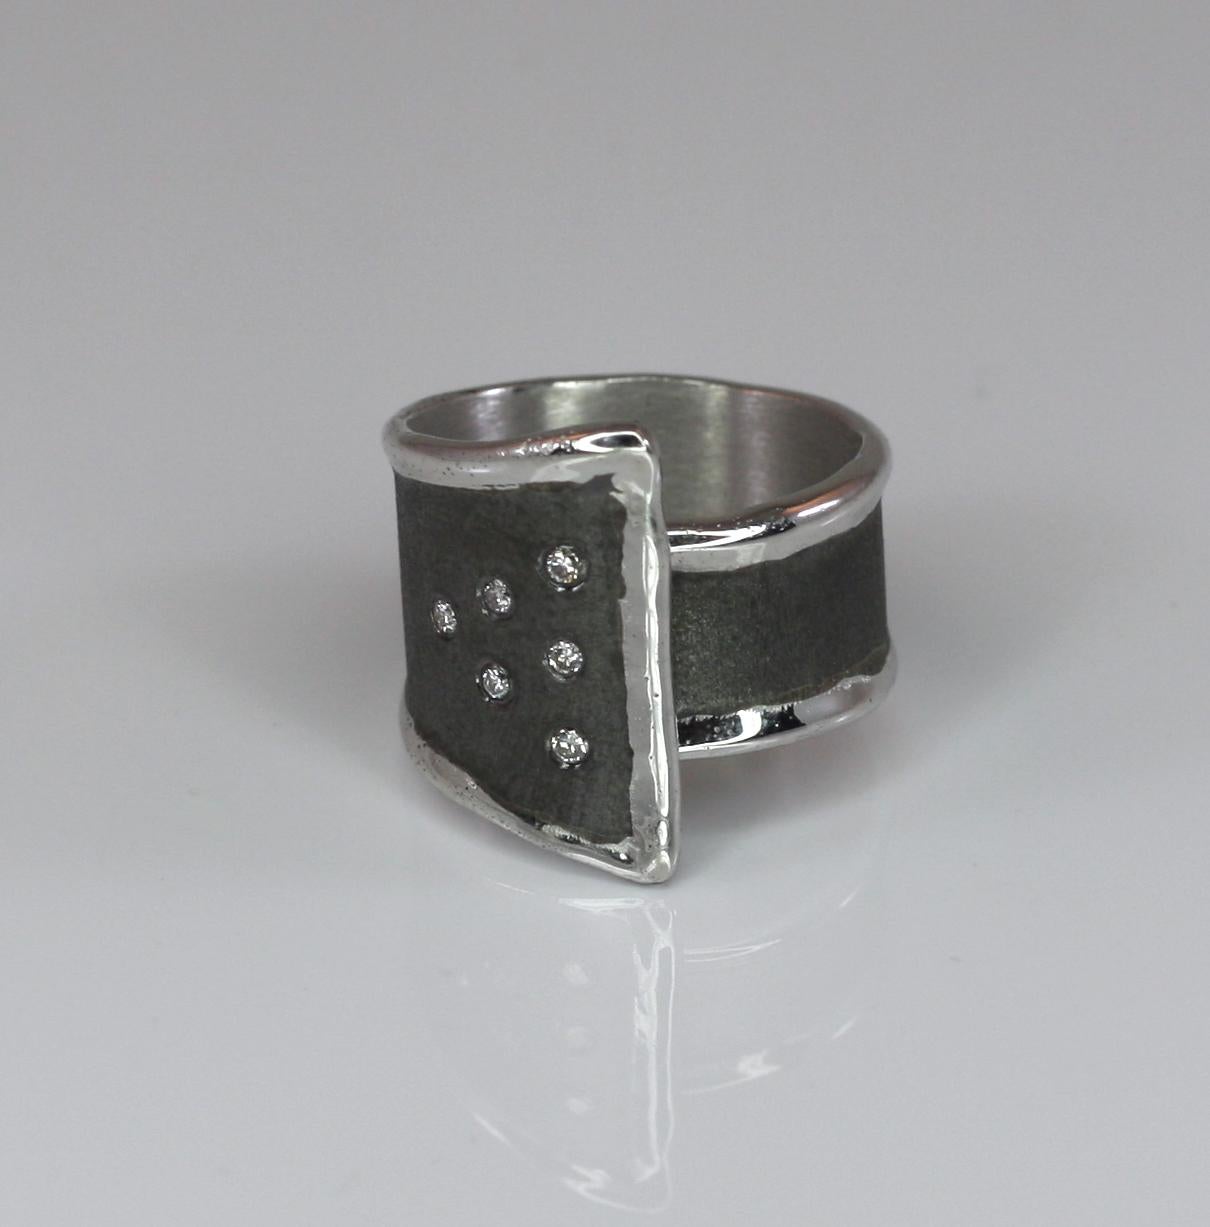 Unique Yianni Creations All Handmade Artisan Ring from Fine Silver and Palladium, to resist elements. This ring features 6 brilliant-cut, a total weight of 0.18 Carat. The brushed texture has a Black Rhodium finish in contrast with shiny liquid